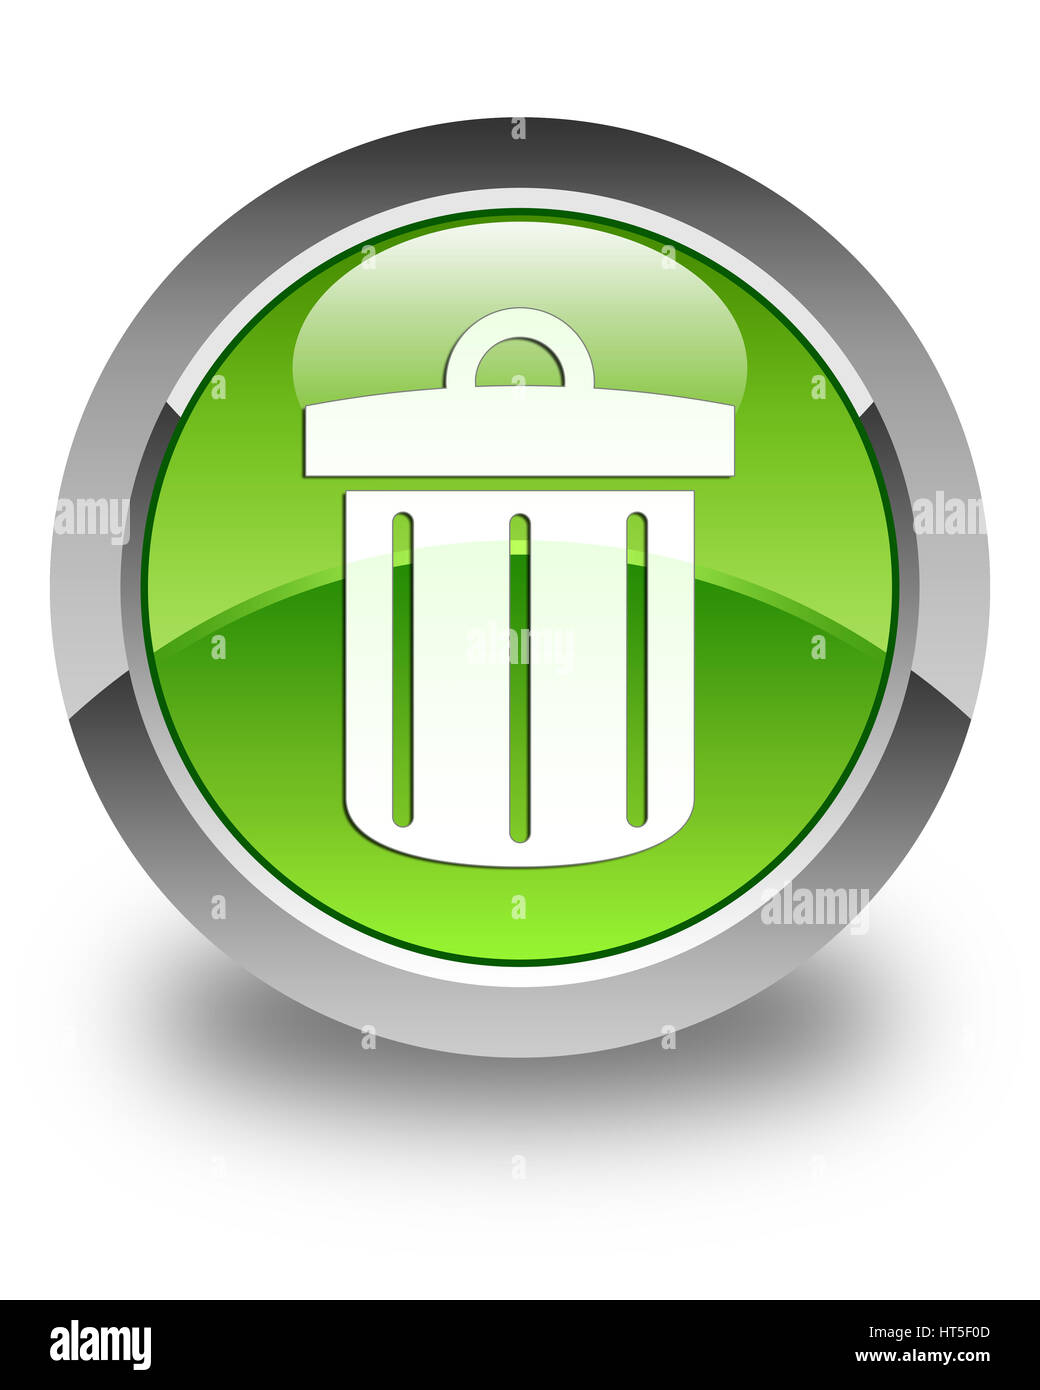 Recycle bin icon isolated on glossy green round button abstract illustration Stock Photo